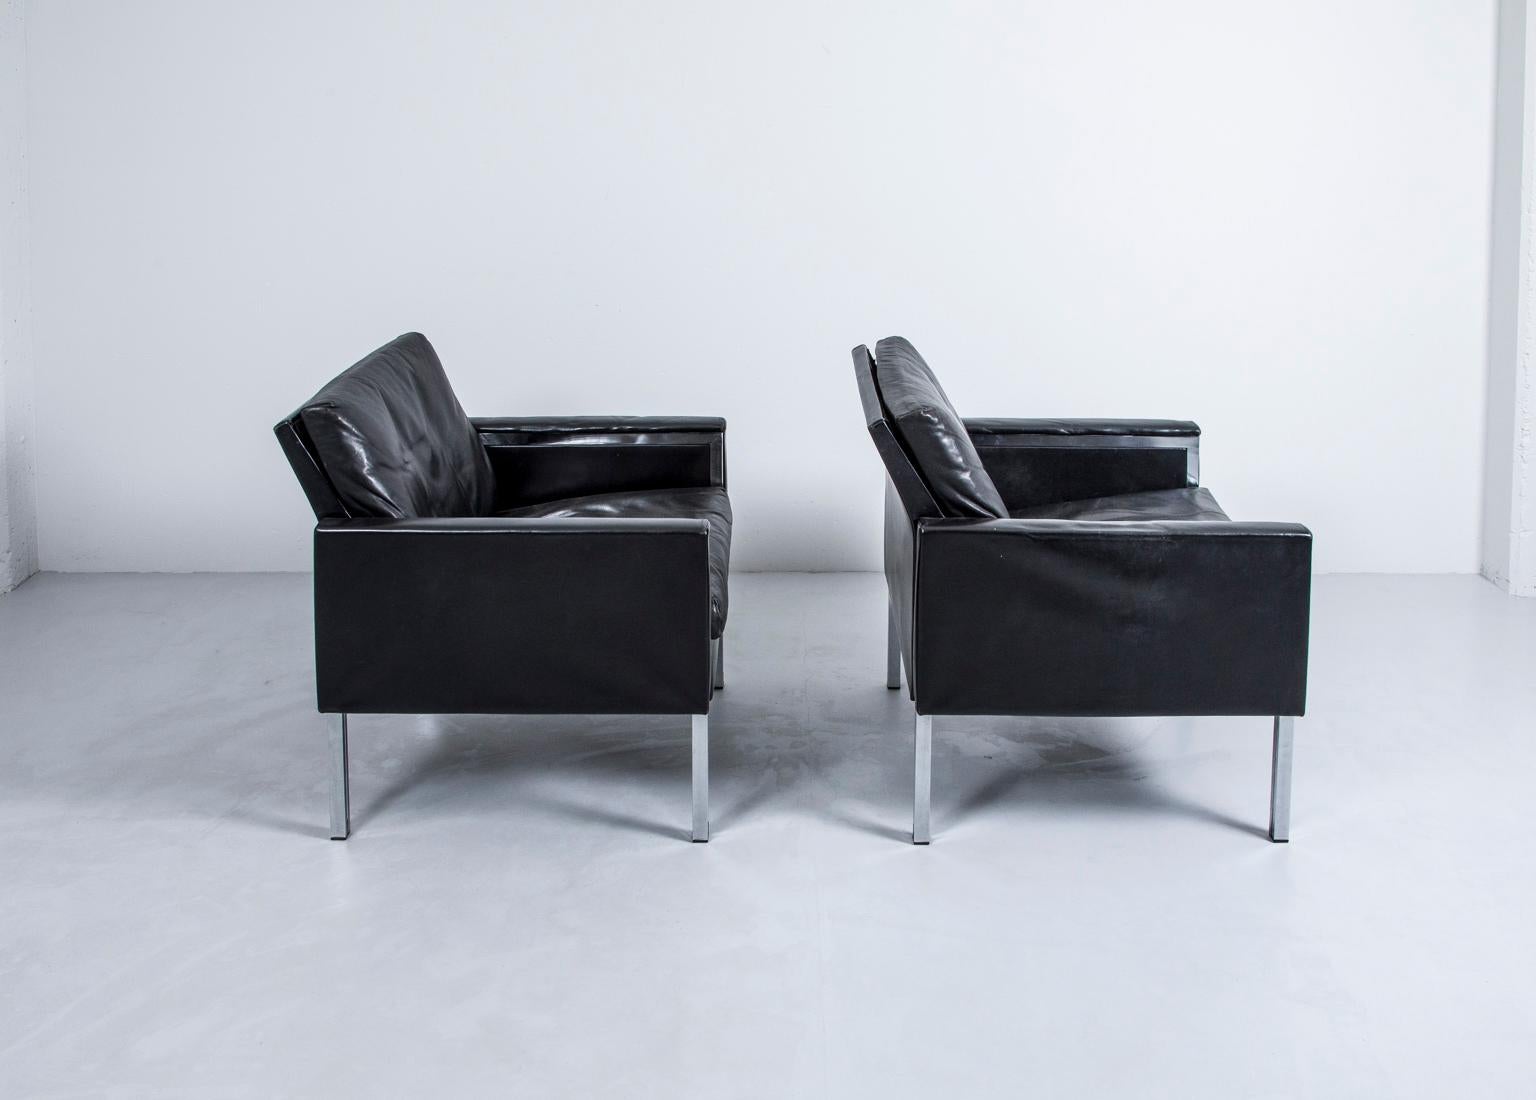 Pair of 1960s black leather lounge chairs with chrome details.